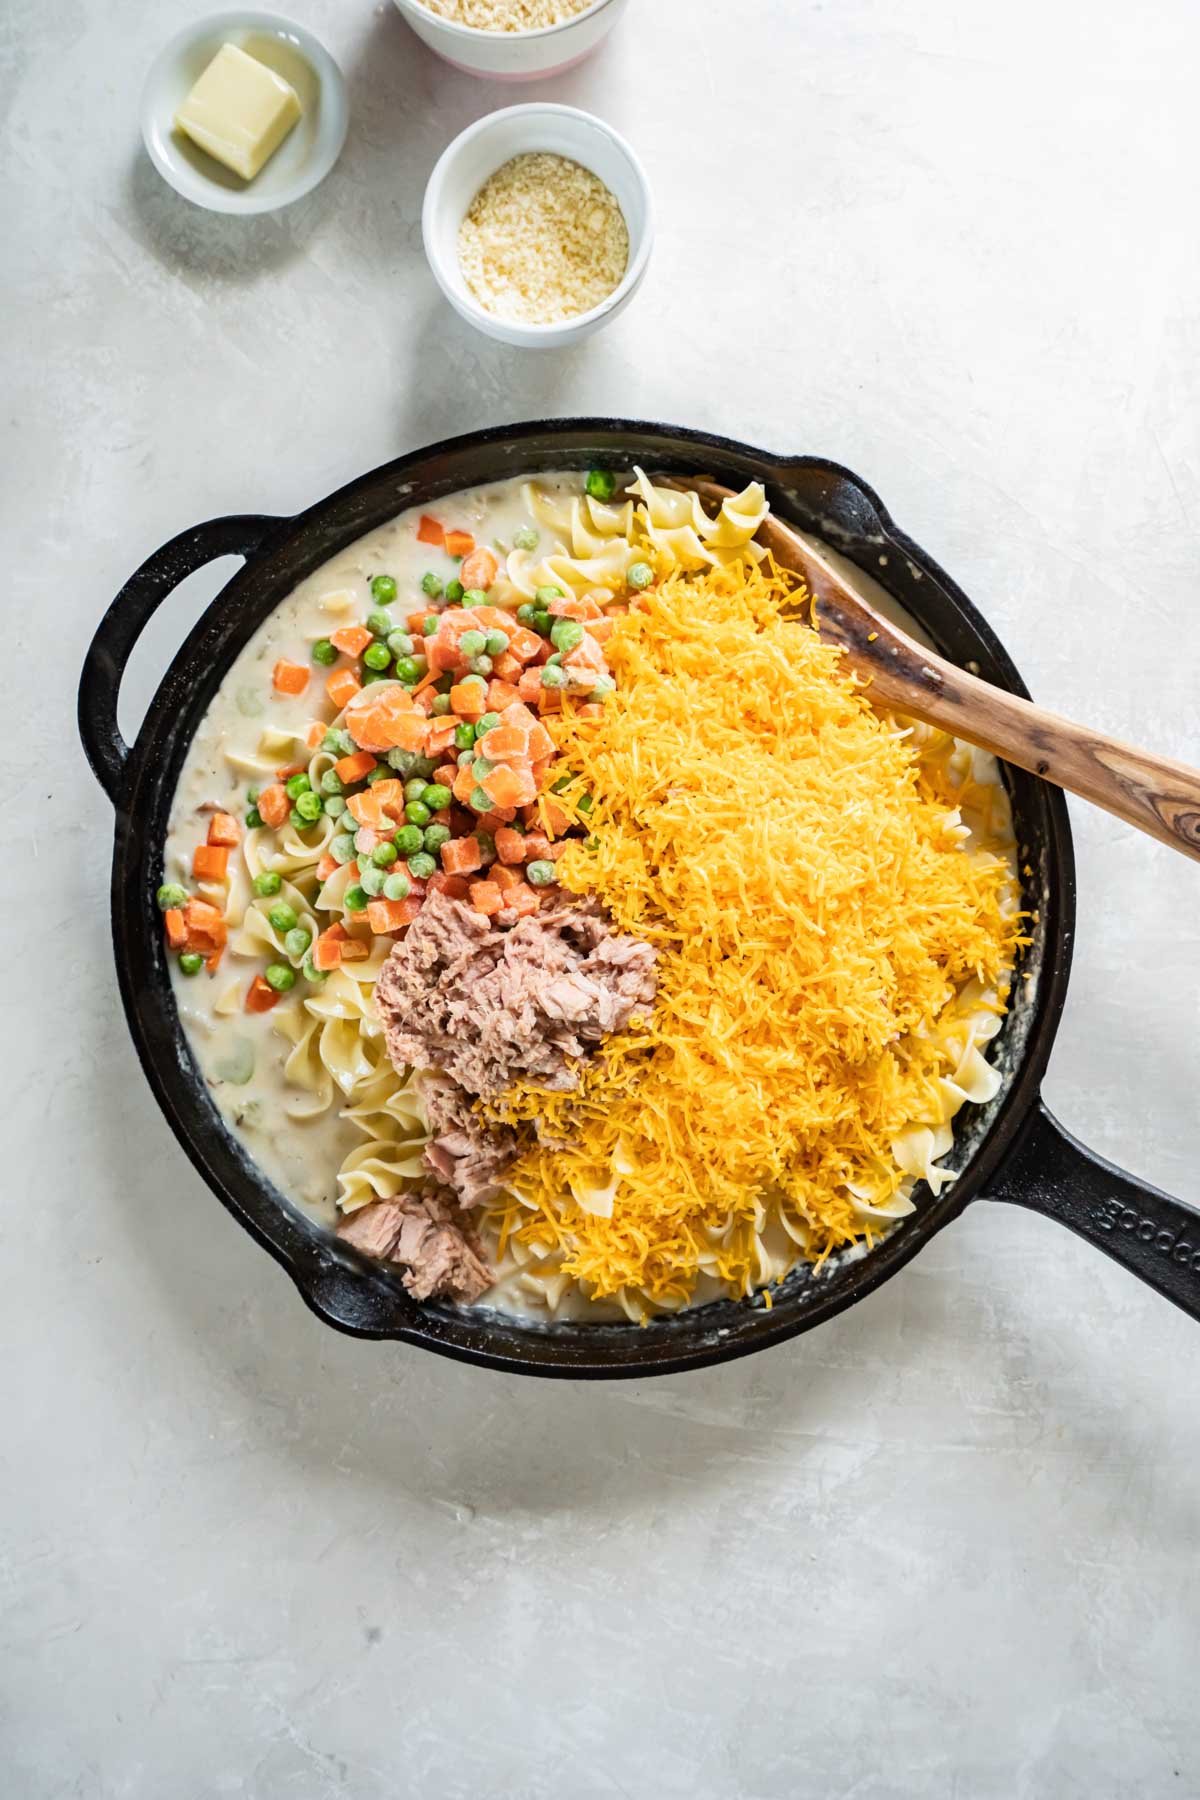 Tuna, carrots, peas, noodles and cheese added to skillet.